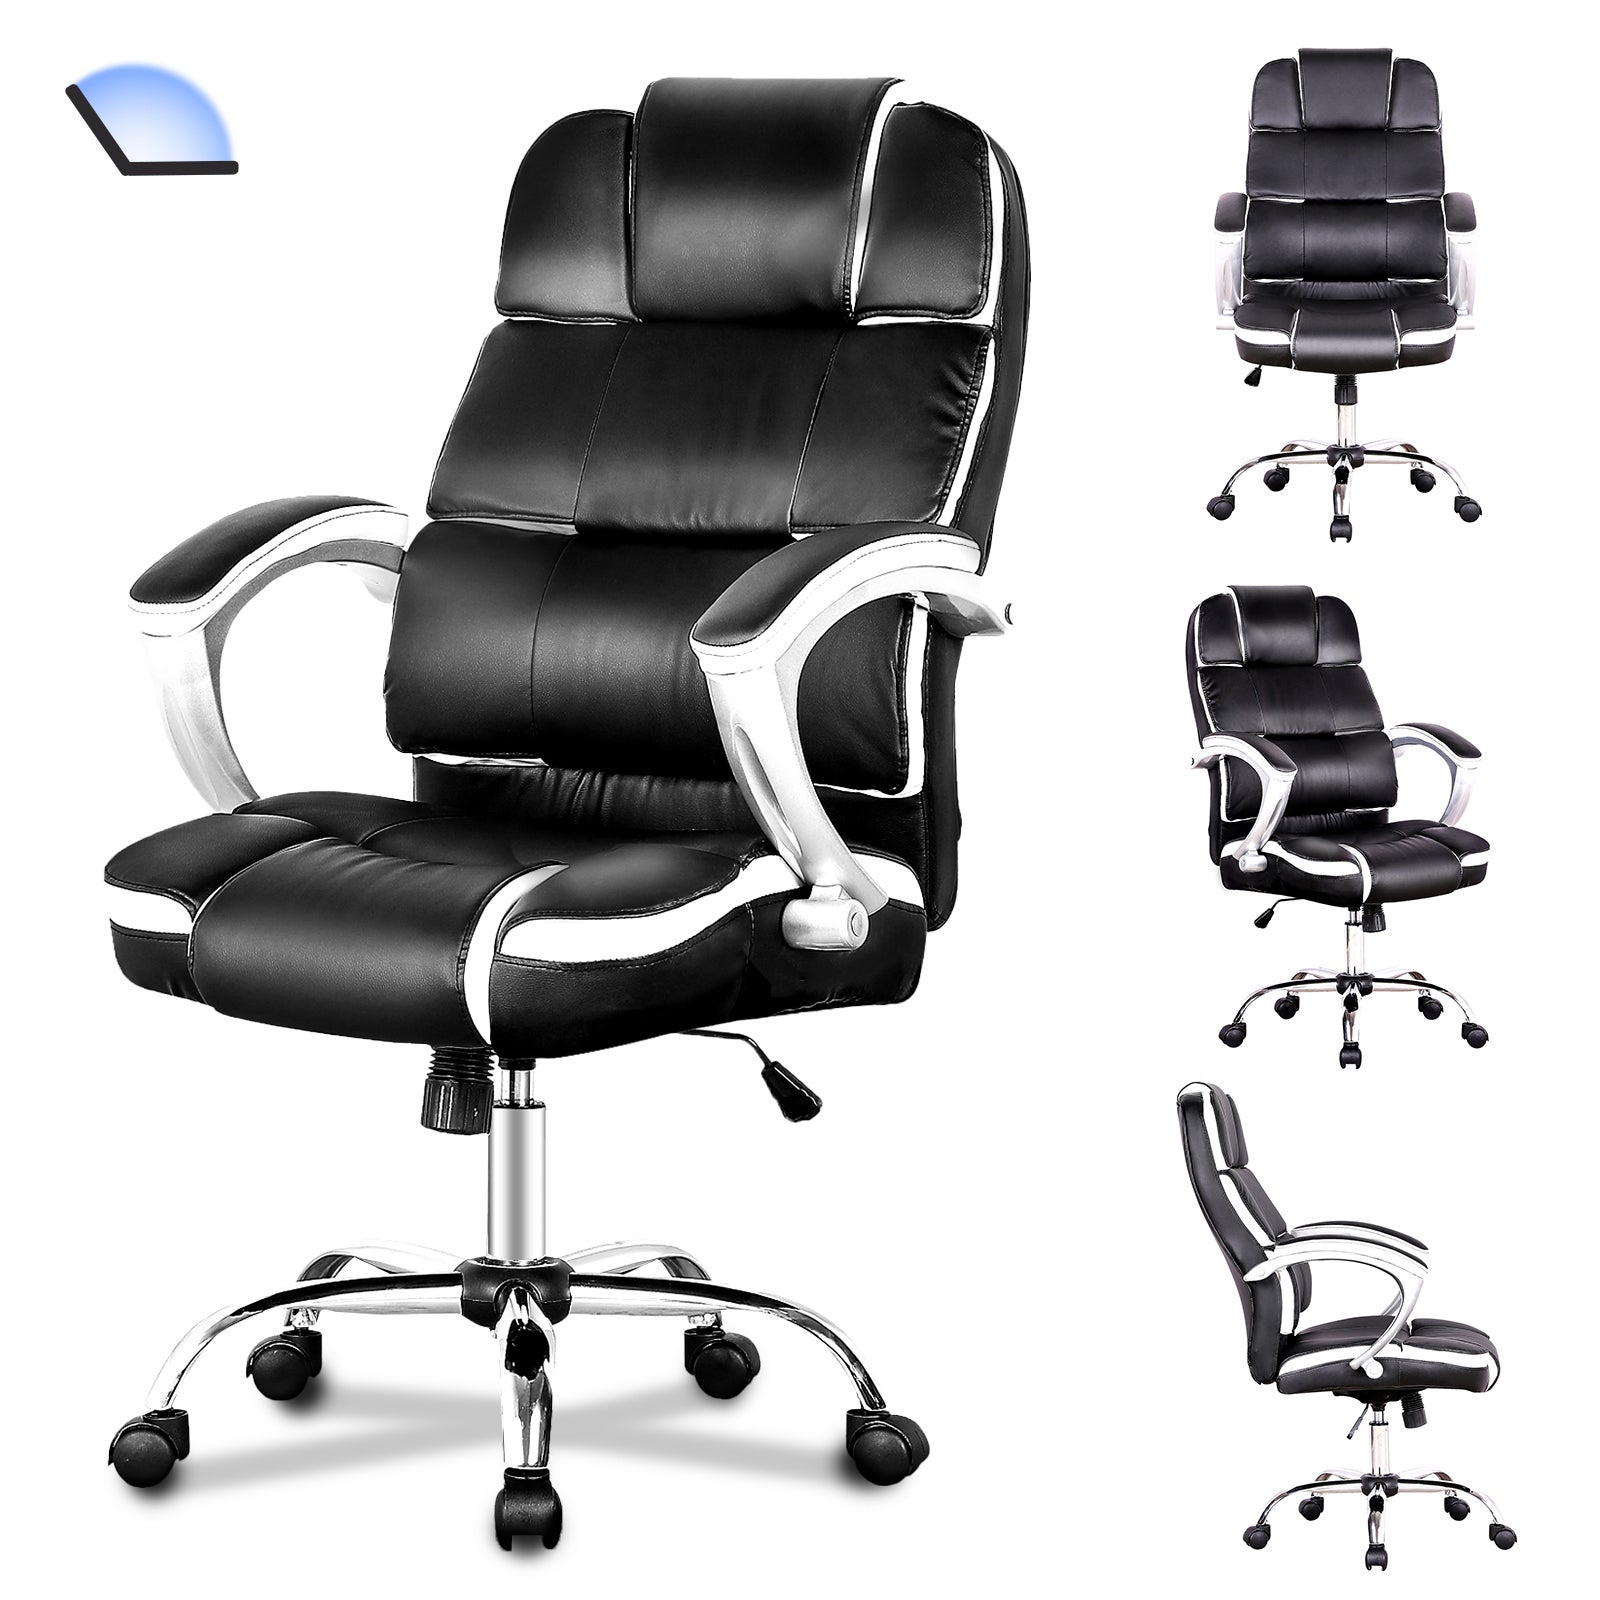 Advwin Ergonomic Office Chair PU Leather Racing Gaming Chair Computer Seat